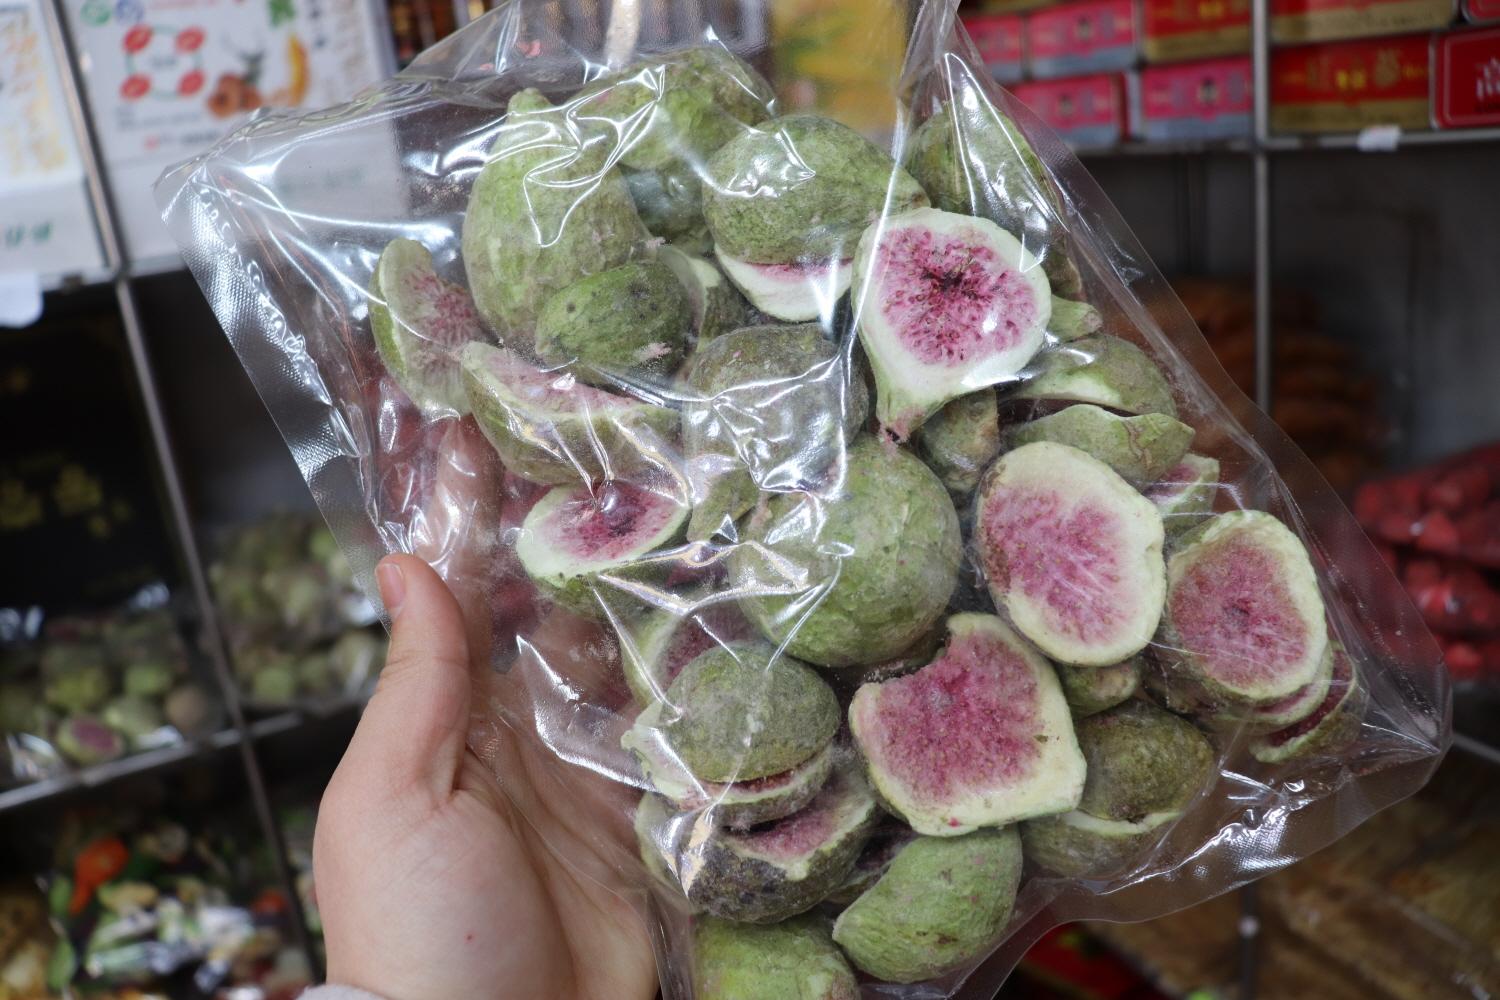 Dried figs from Jangan Sangsa, a natural and delicious ingredient for recipes and cuisine in Korea, a staple and whole food.